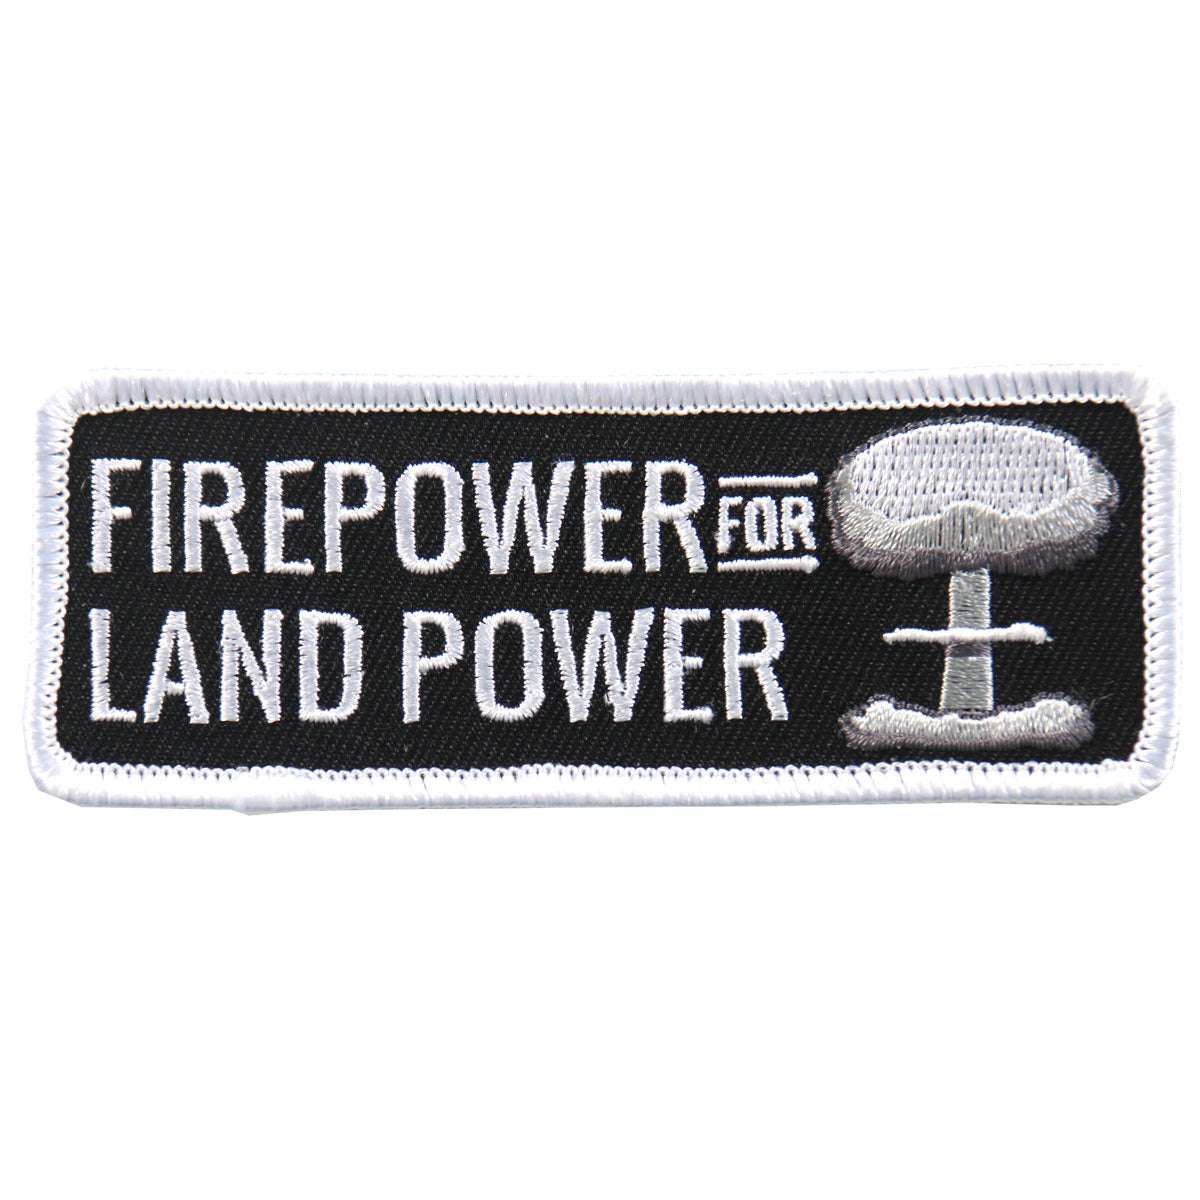 Hot Leathers Firepower For Land 4"x2" Patch PPL9585